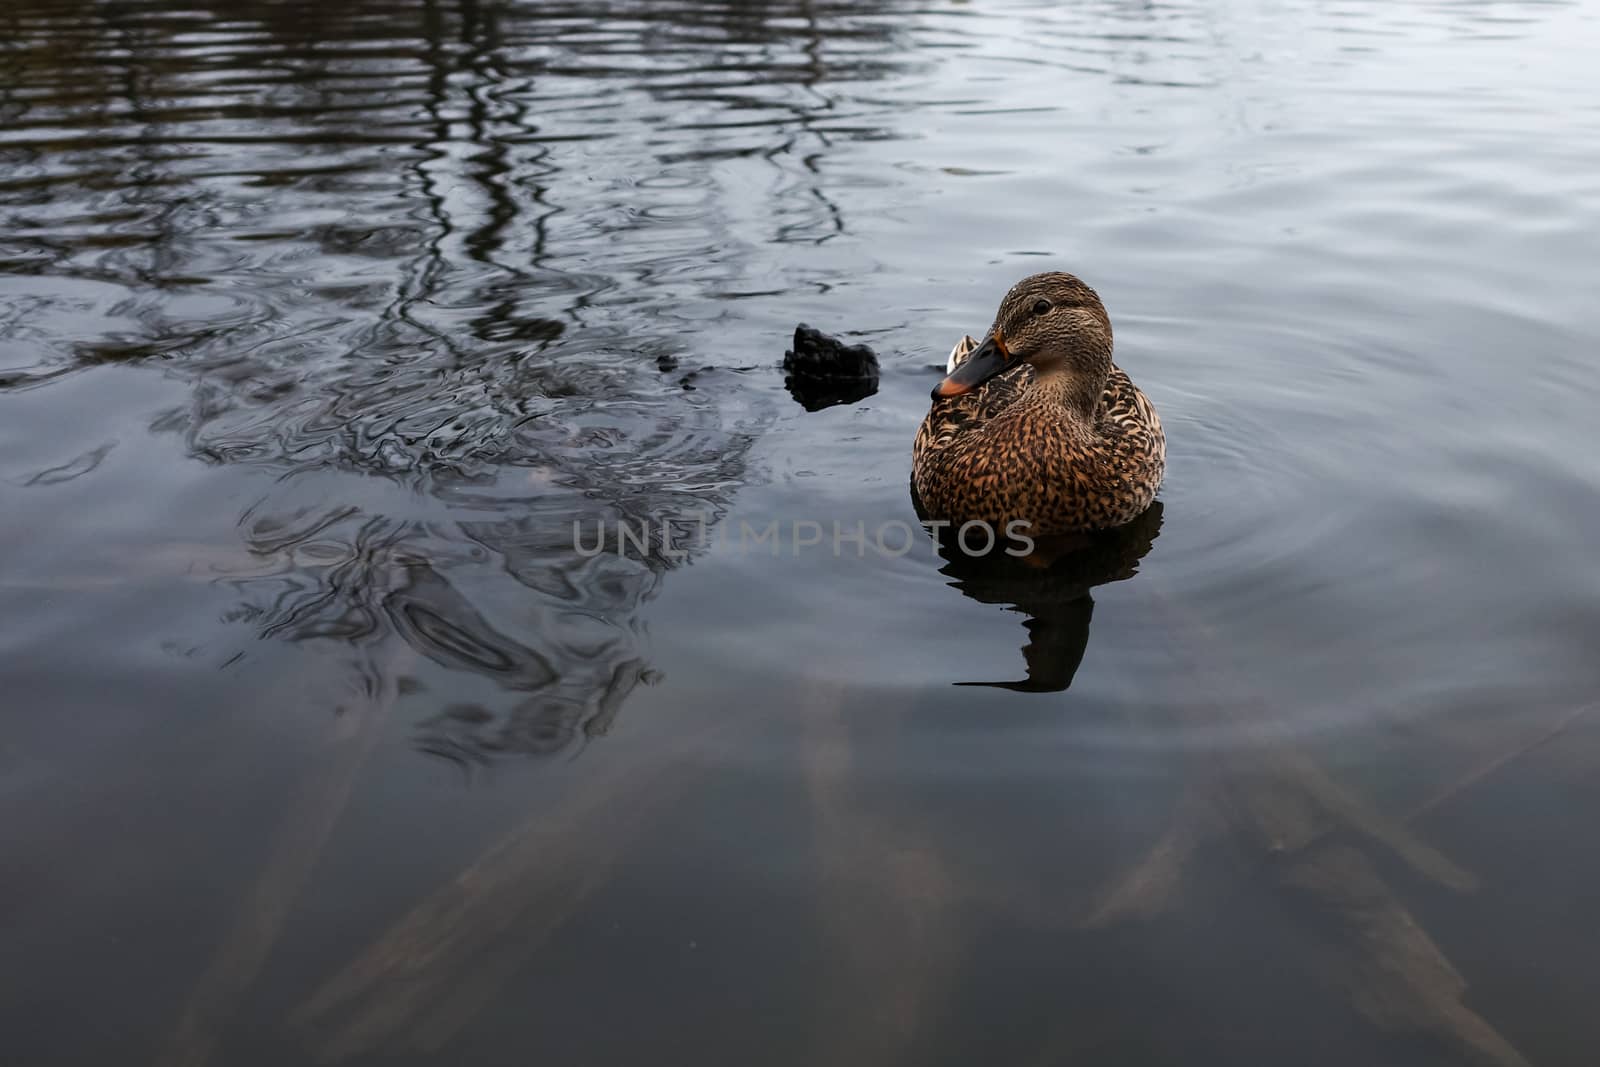 A female mallard duck sits floating calmly on the surface of a pond in a wide angle image showing a dark, but reflective, water surface.